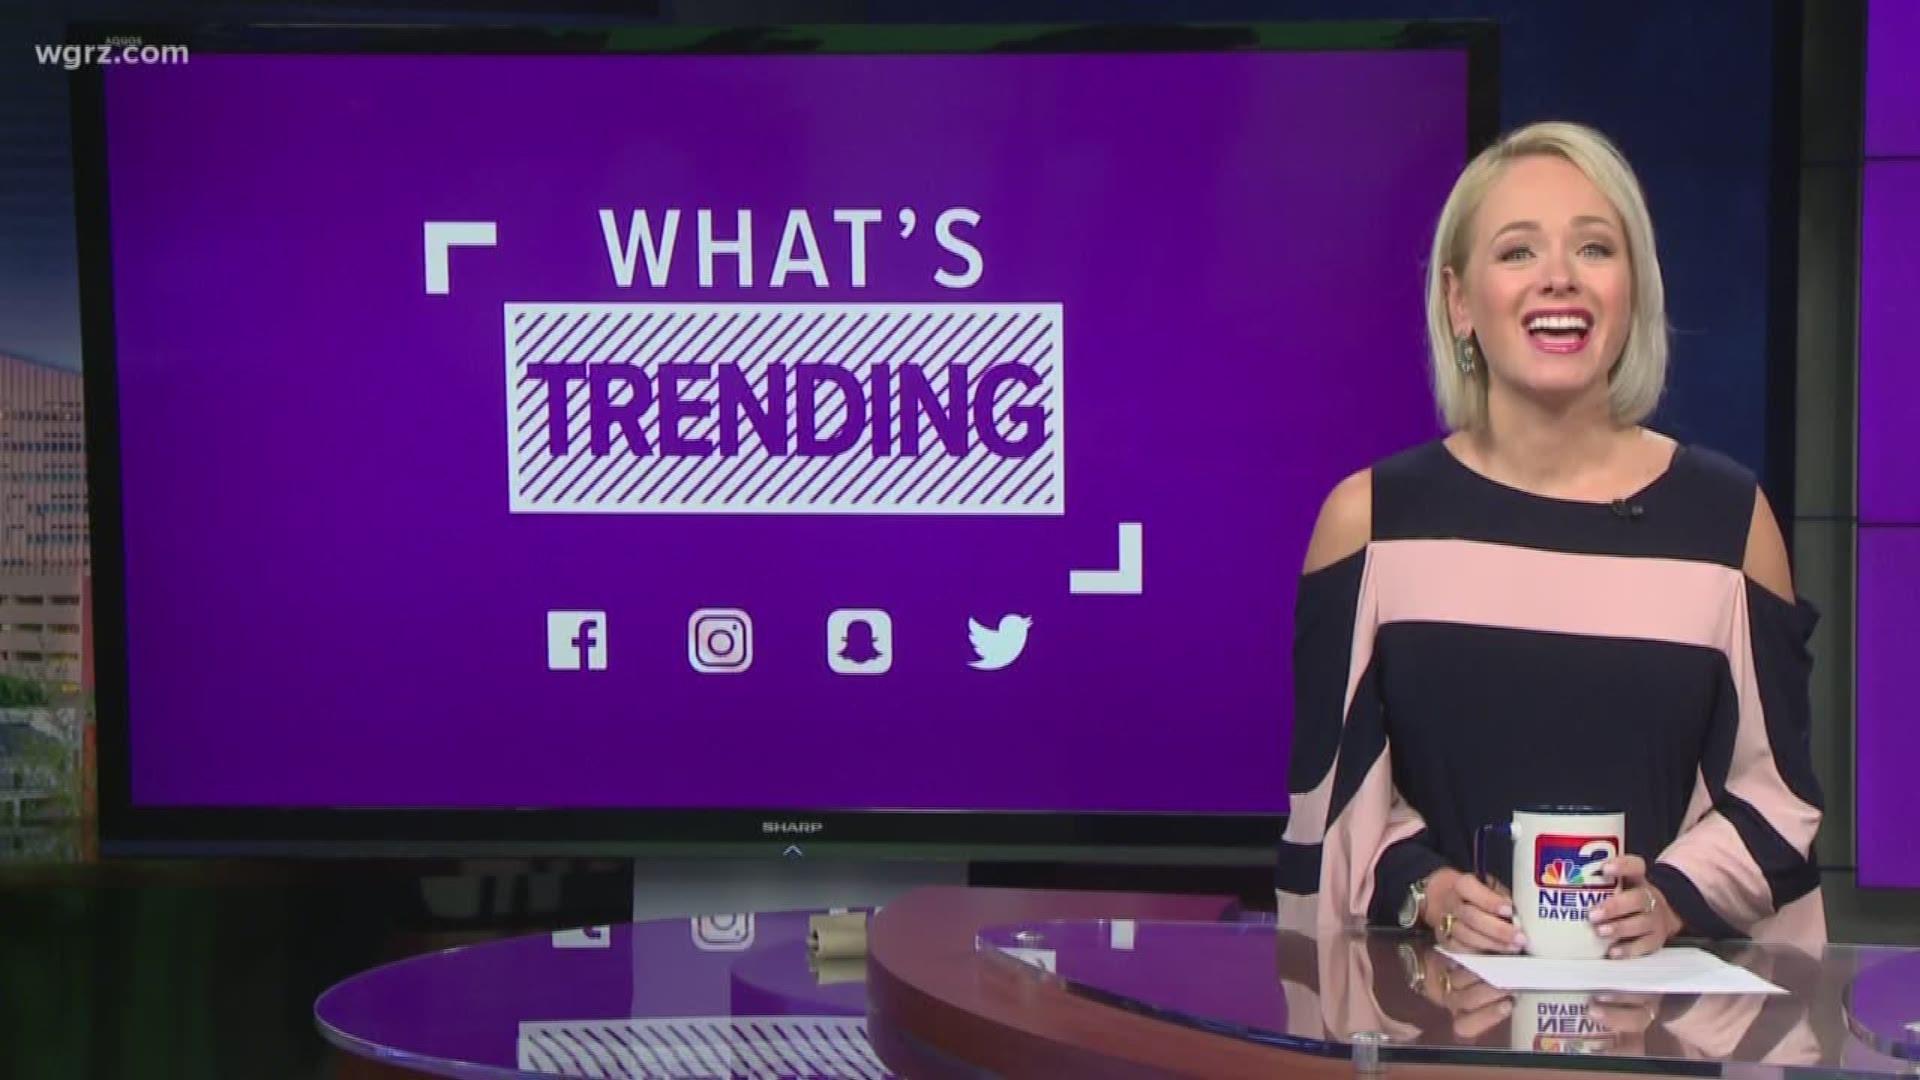 A girl on Tinder dupes hundreds of guys into a massive date. Plus, a recap of the VMAs that hopefully won't make you feel like a dinosaur and an iconic product gets a 21st century makeover. It's "What's Trending?" for Tuesday, August 21, 2018.